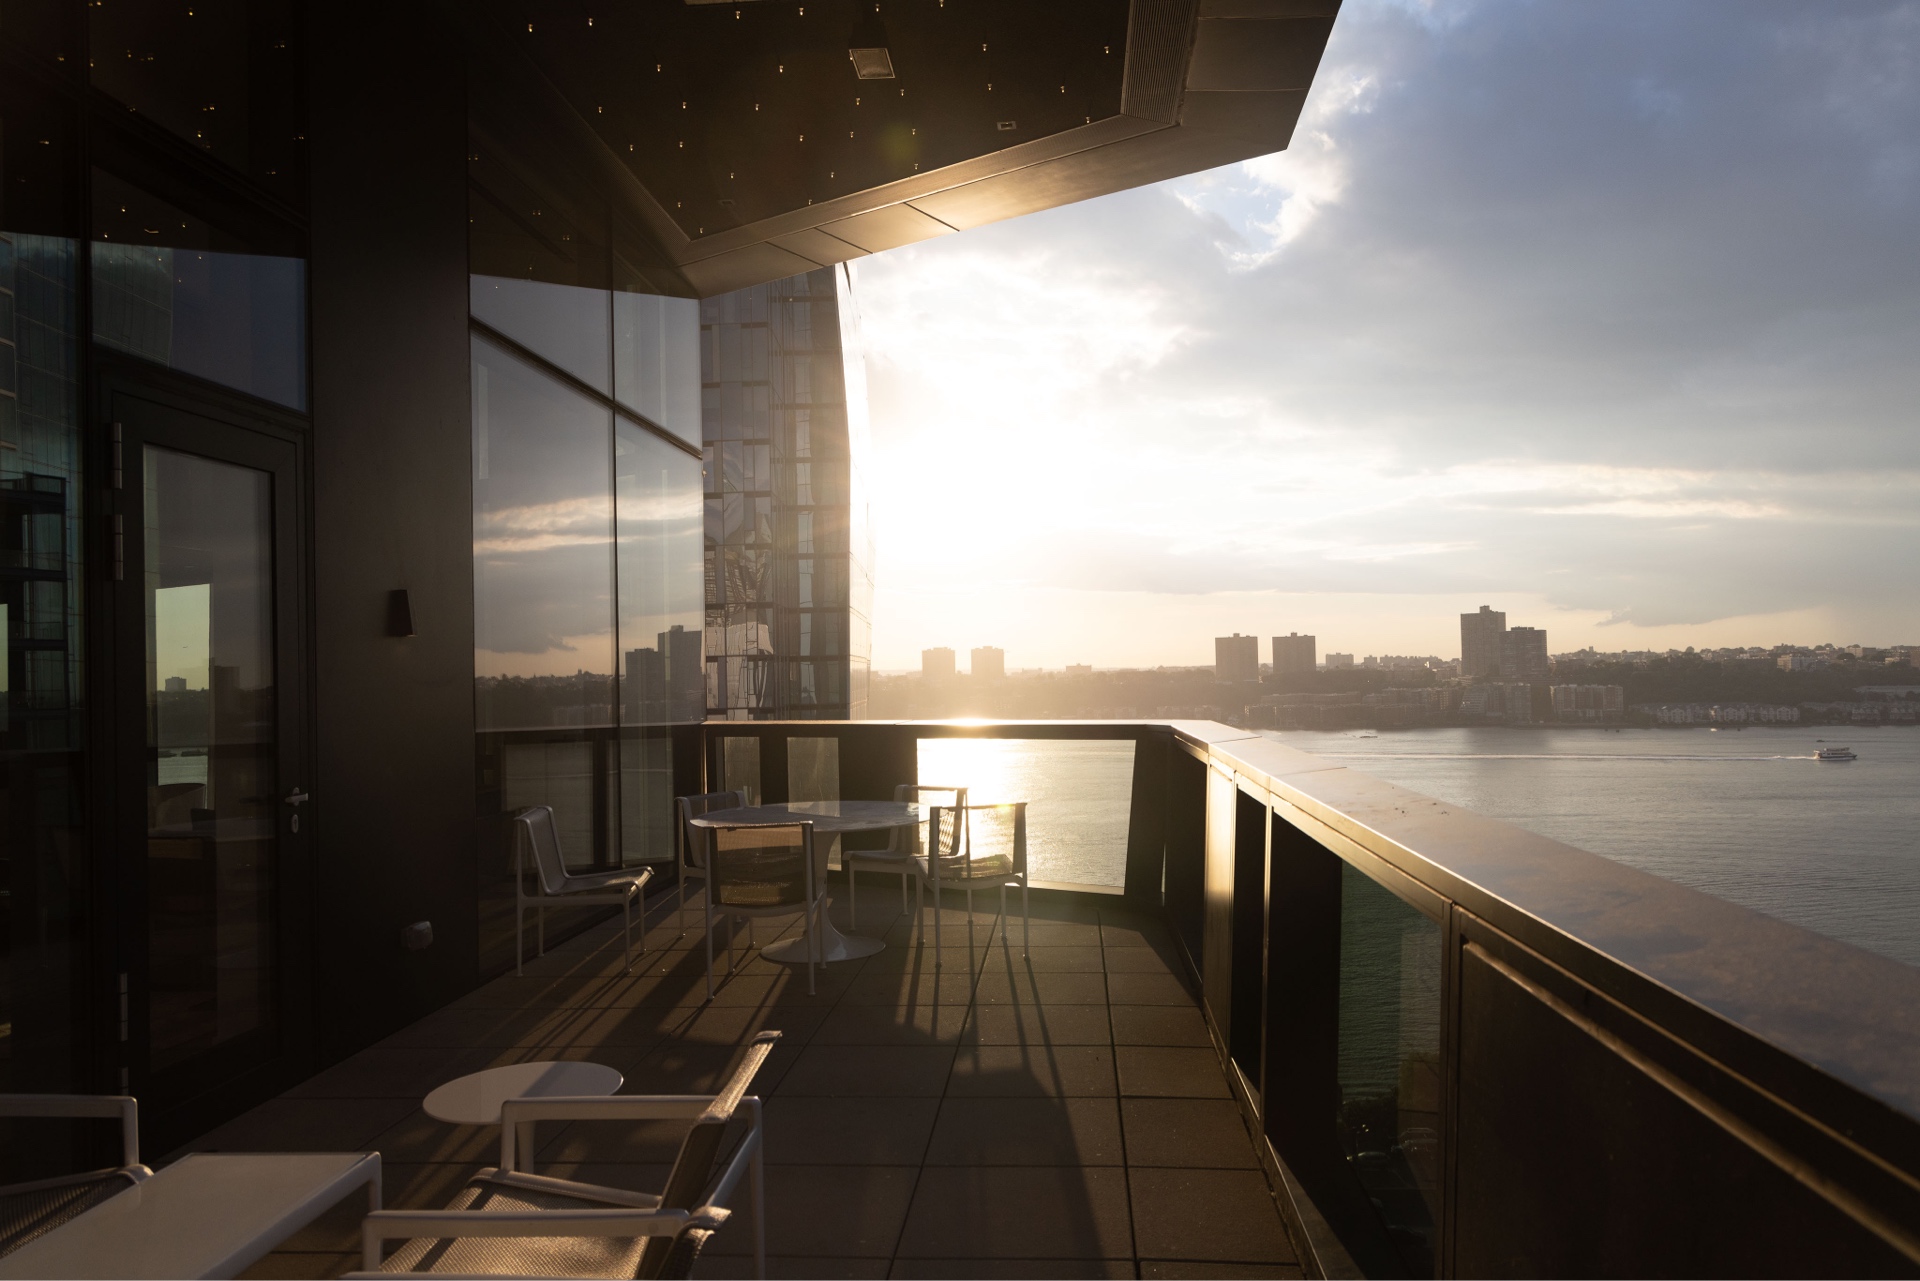 A serene sunset view from a modern balcony overlooking a calm river and a cityscape, with the warm glow of the sun casting reflections on the glass balustrade and creating a tranquil atmosphere.